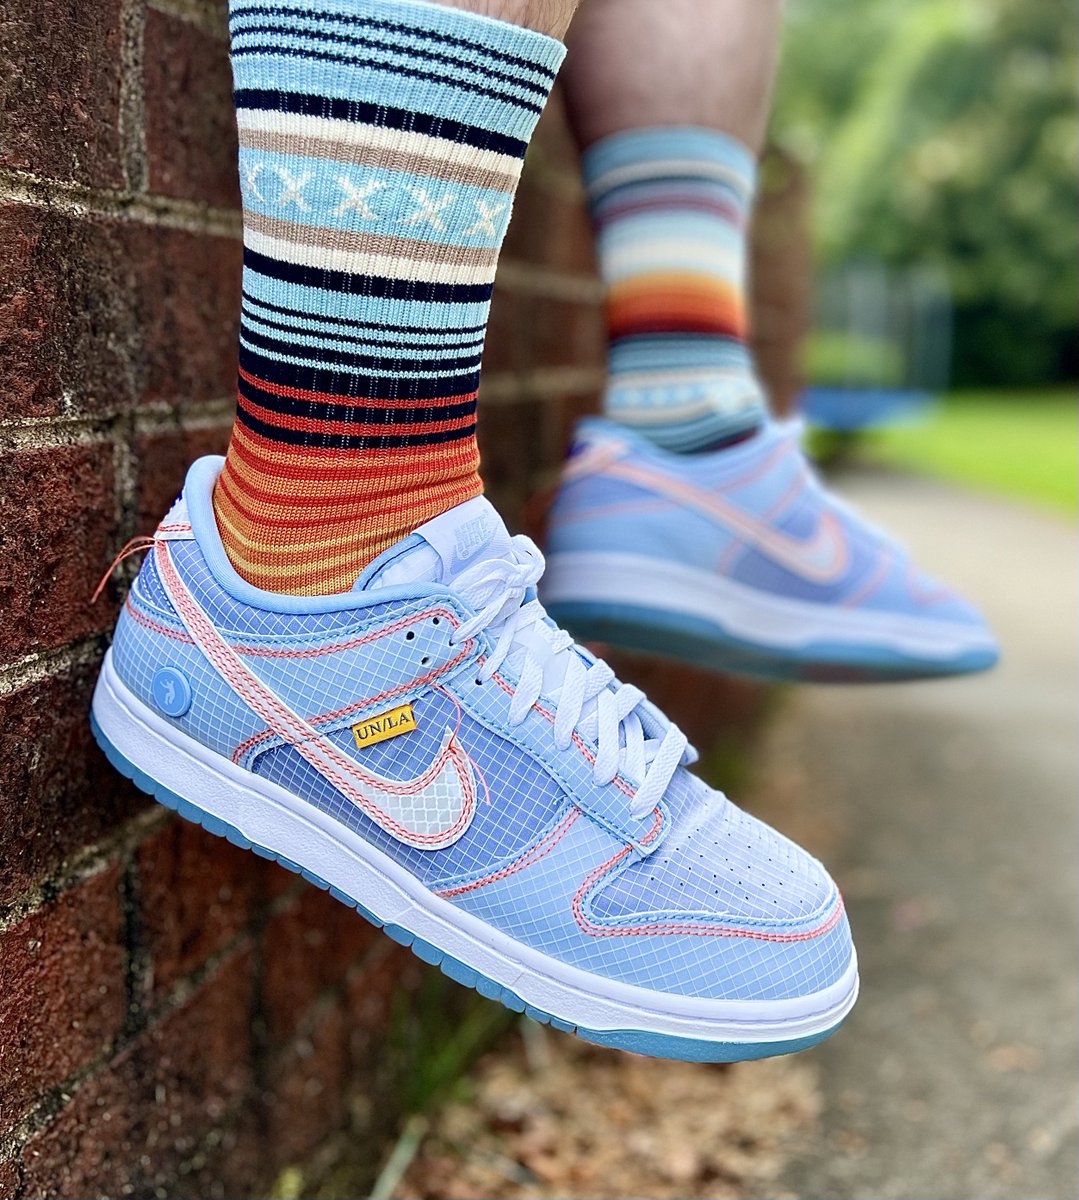 Day 2- ‘Remember the time’
Favorite sock and sneaker combo…I’m going with my Union LA Passport Argon Dunks & socks from Stance. 👌🏻
😮‍💨🥵🔥👟

@JerLisa_Nicole 
#BHMKOTD
 #JMillzChallenge #SNKRSLiveHeatingUp #SNKRSKickCheck #YourSneakersAreDope #BHMKOTD24
#Stance 
#UnionLosAngeles